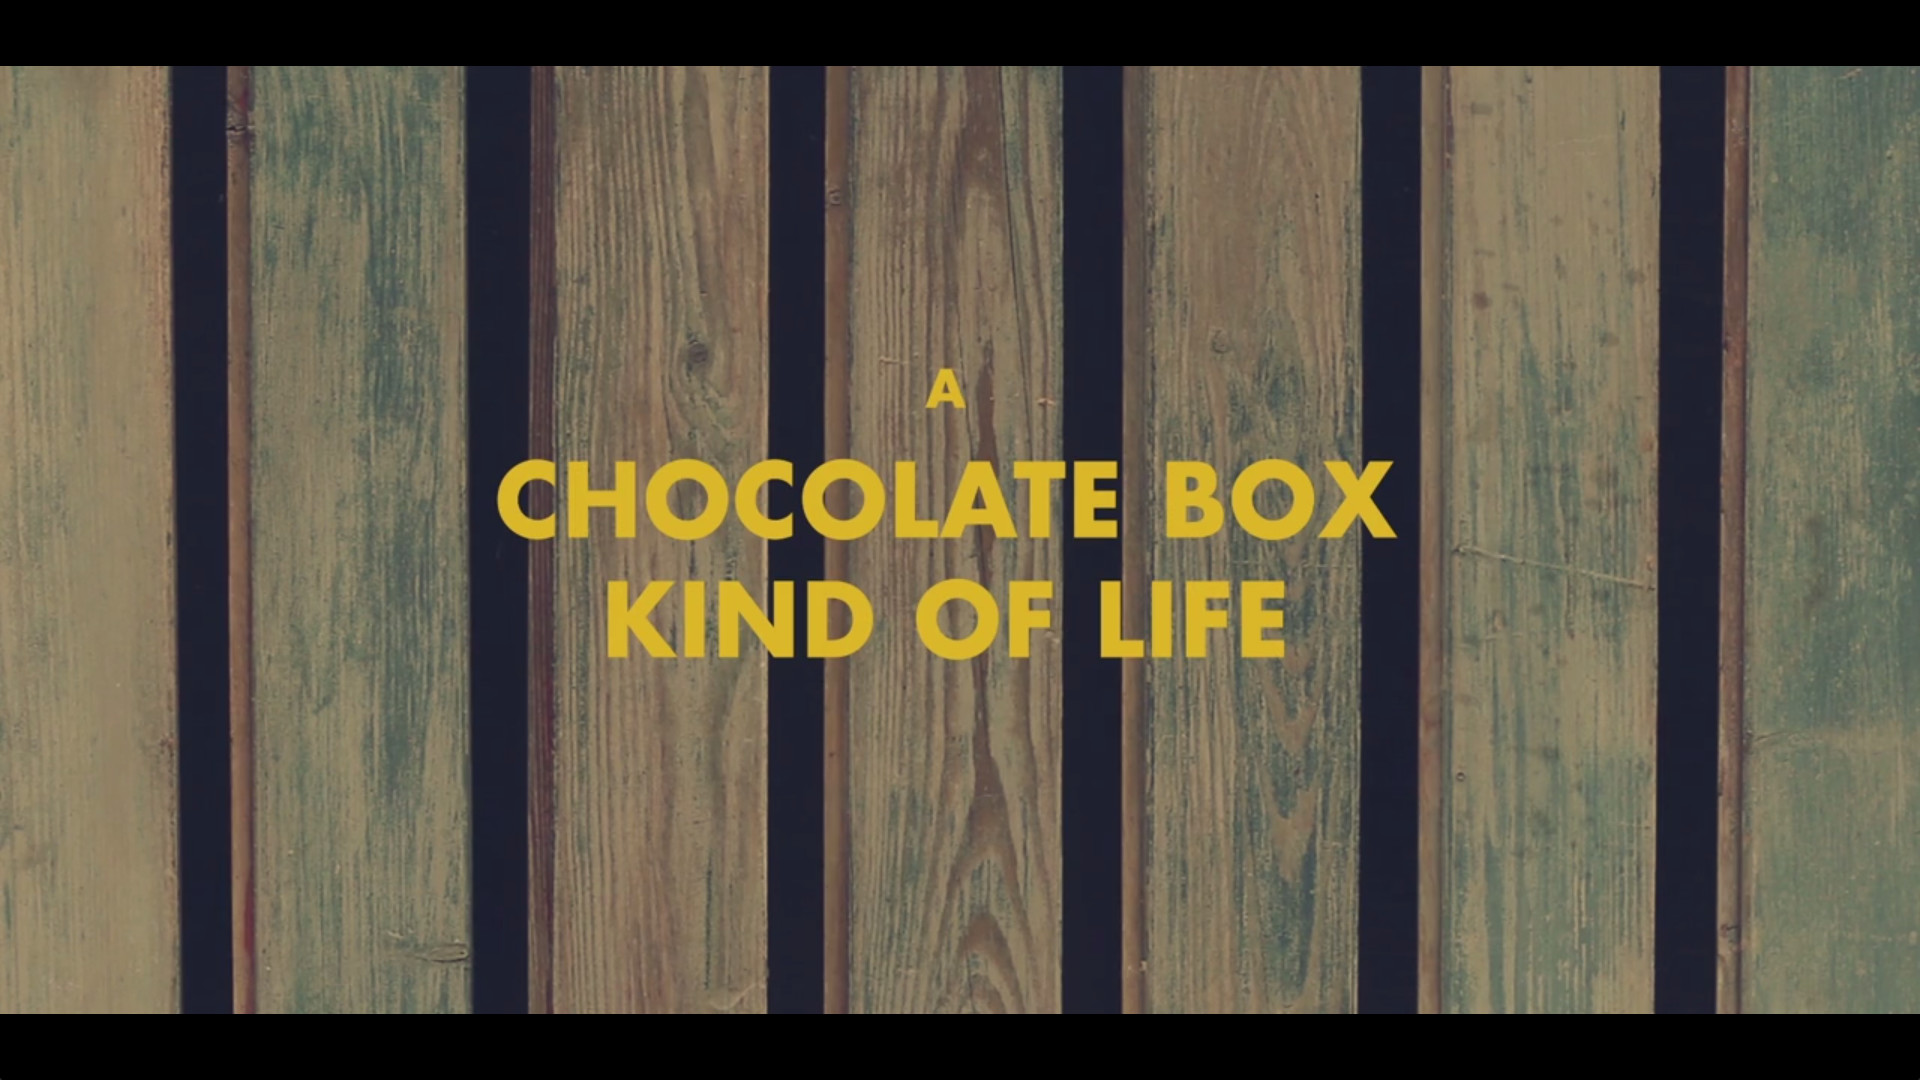 If Wes Anderson directed Forrest Gump